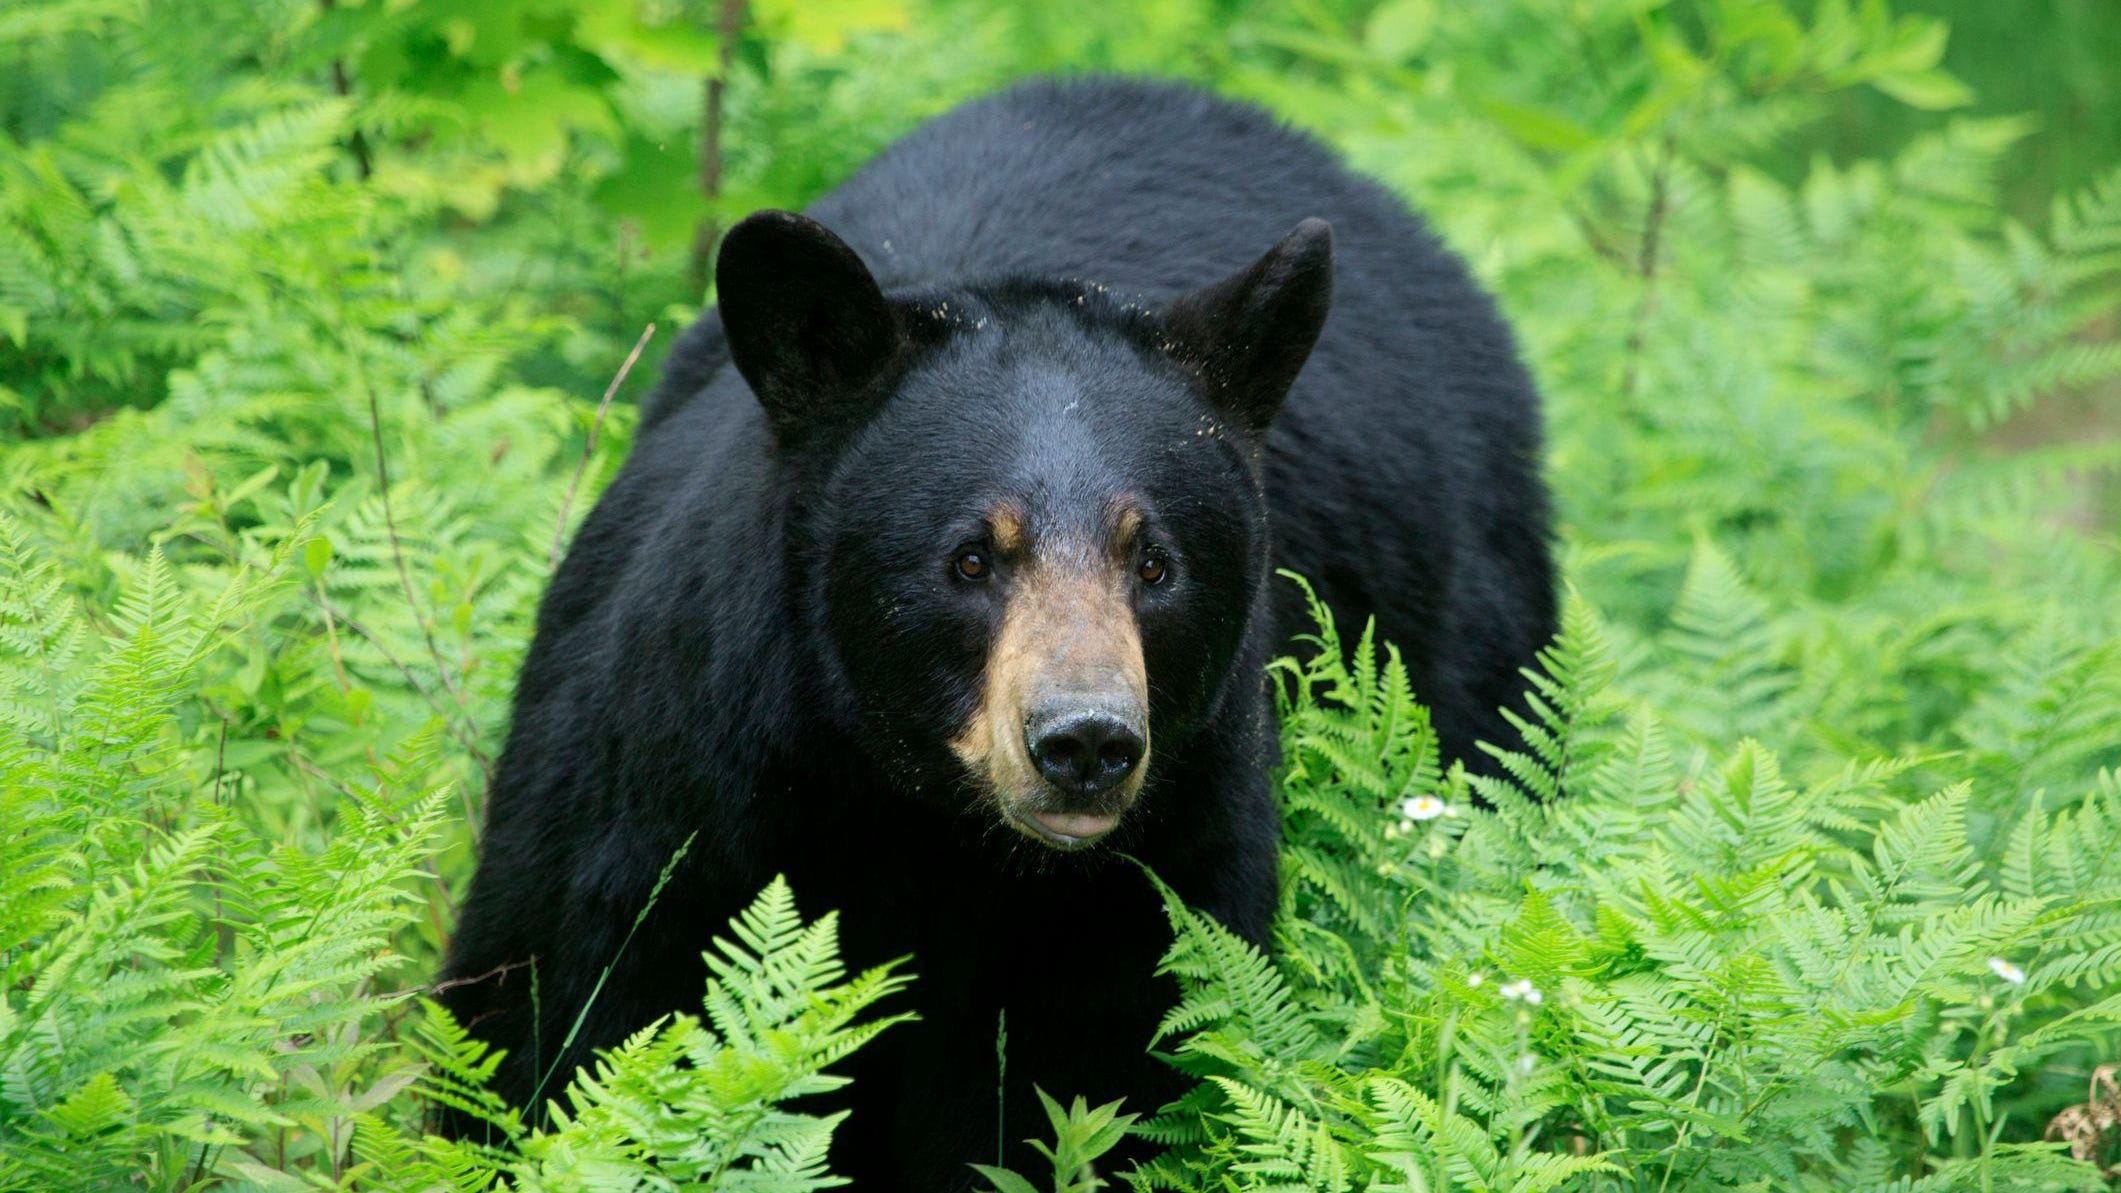 700-pound black bear in NJ sets world record, bowhunting group says